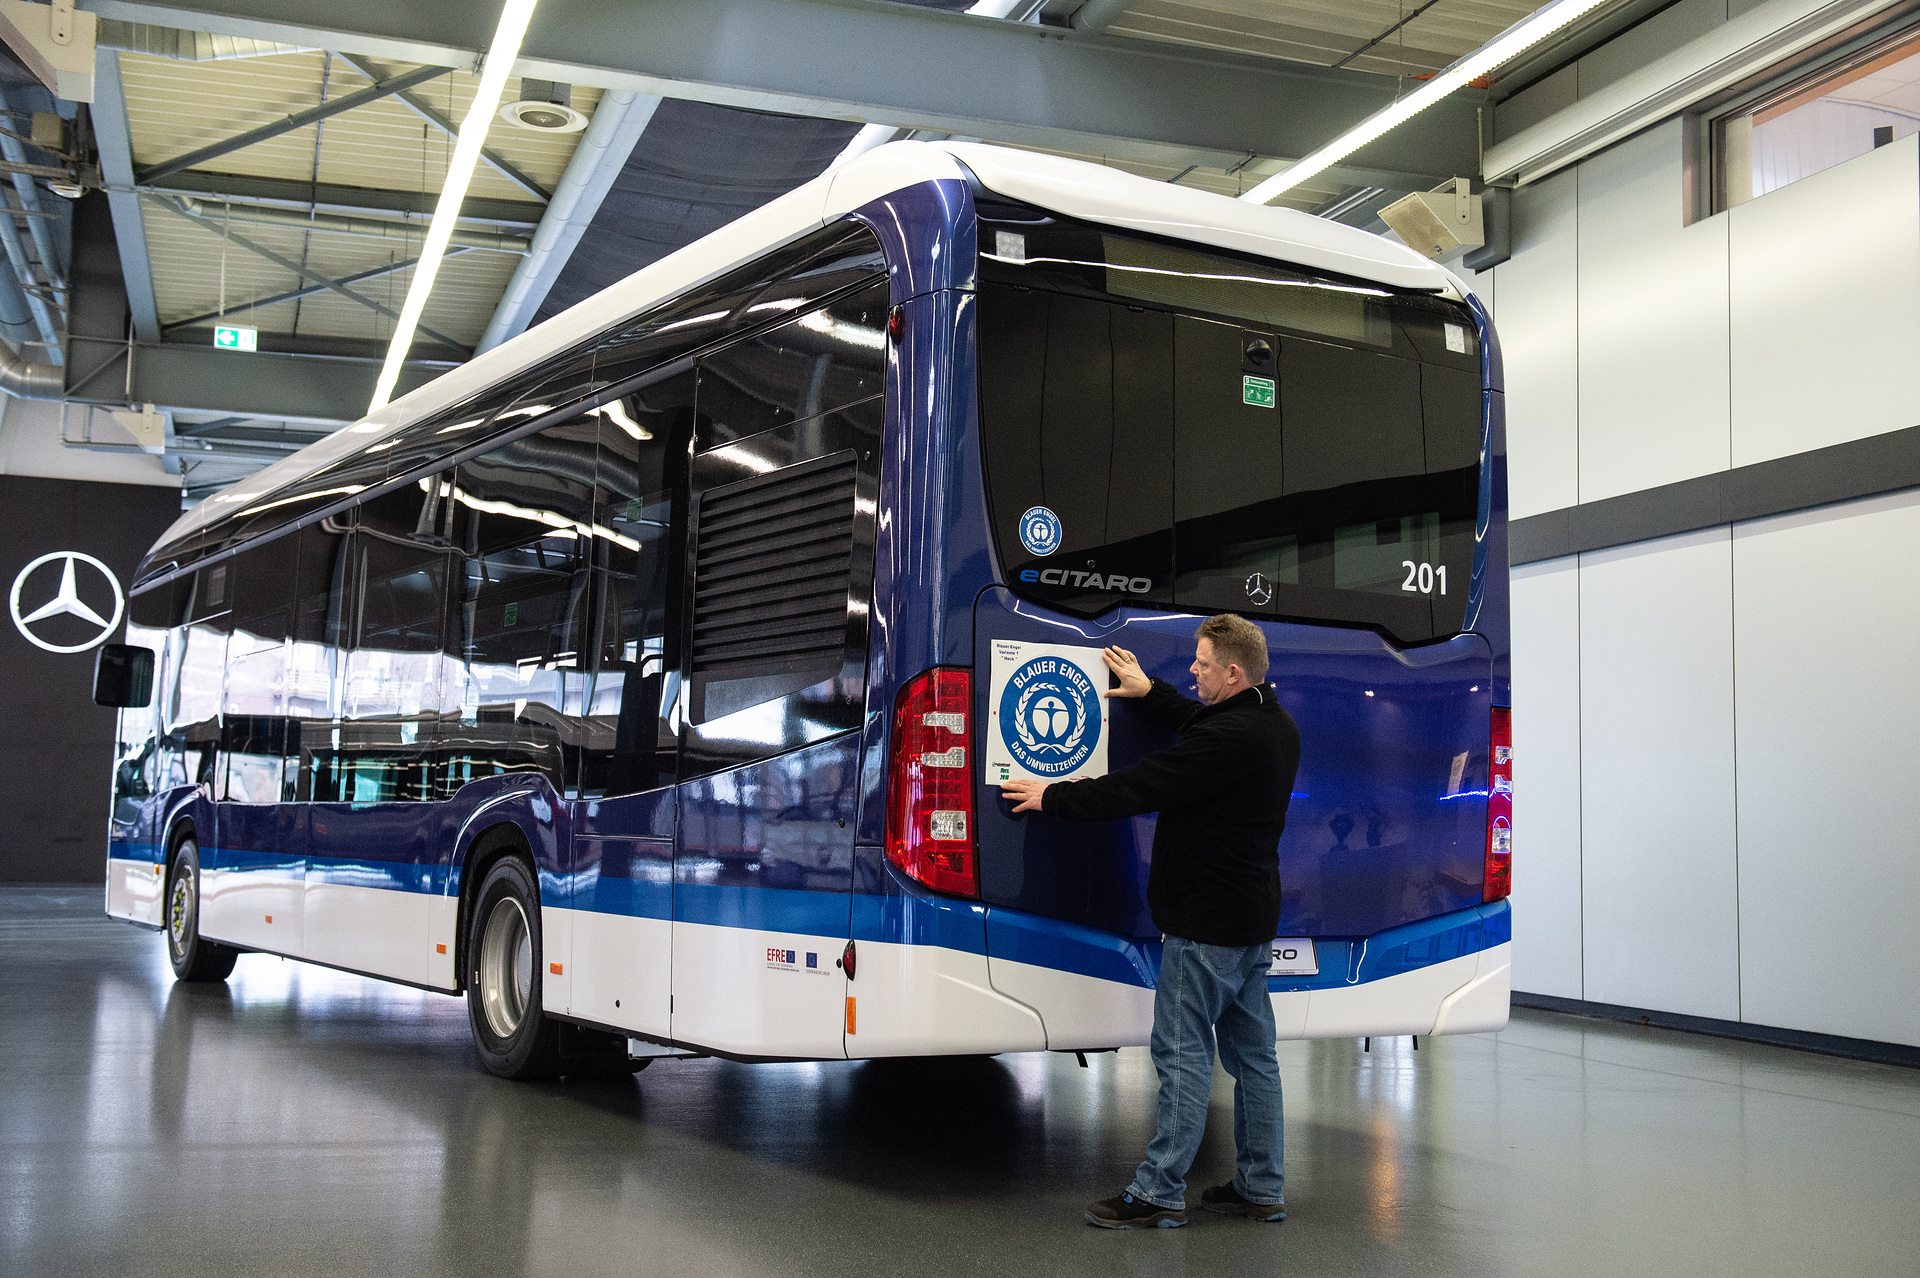 Efficient and environmentally friendly local public transport in cities: Environmental label "Blue Angel" for the Mercedes-Benz eCitaro